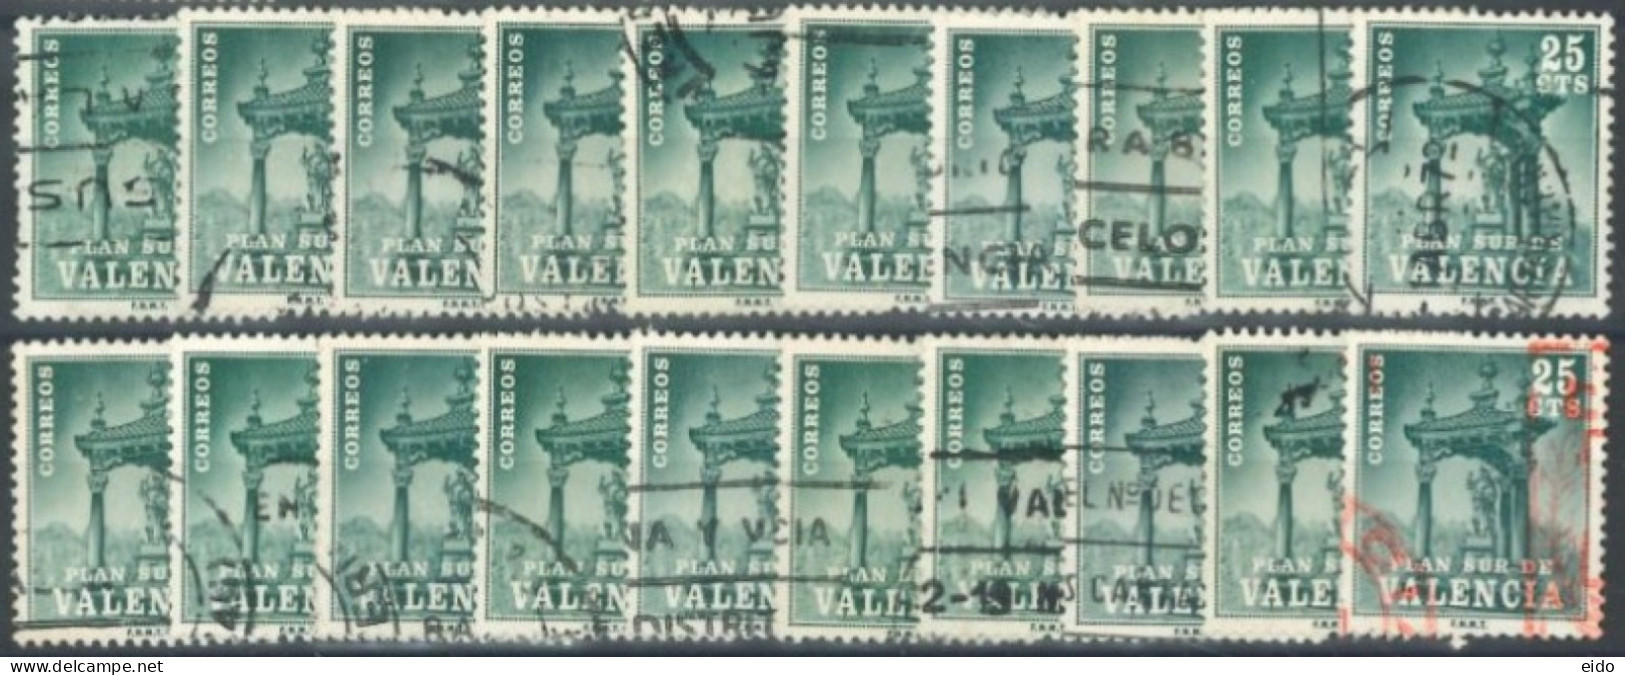 SPAIN, VALENCIA STAMP QTY. 20 DISCOUNTED (SPECIAL PRICE), USED. - Used Stamps